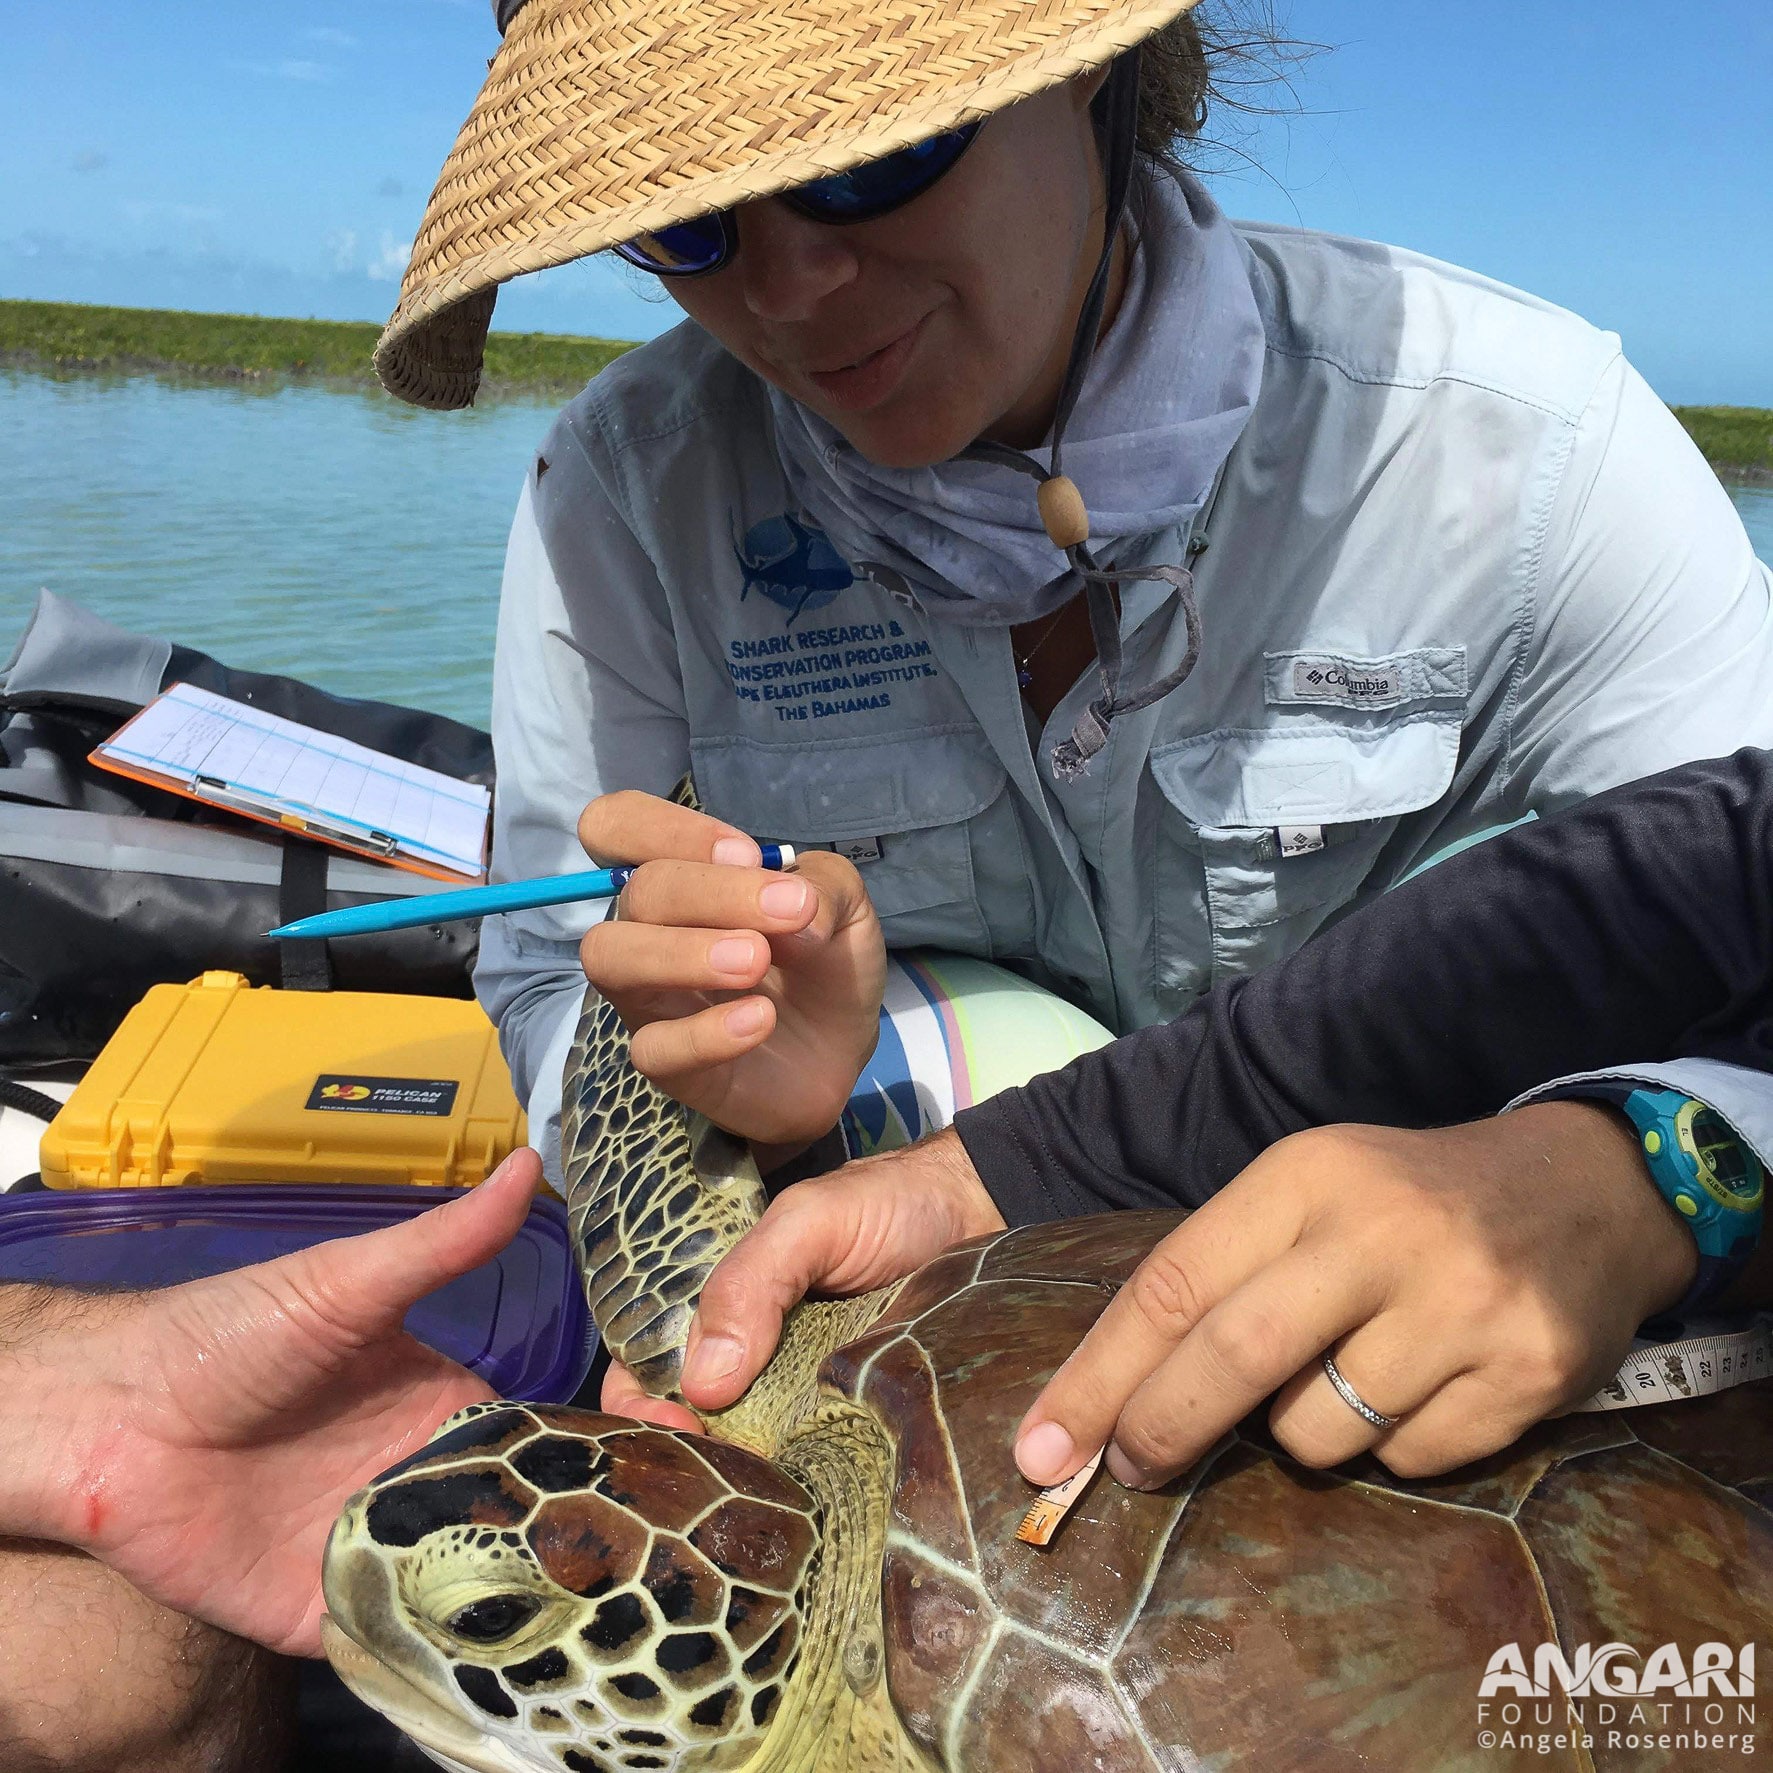 Preparing to measure the carapace of a green sea turtle. PC: Angela Rosenberg